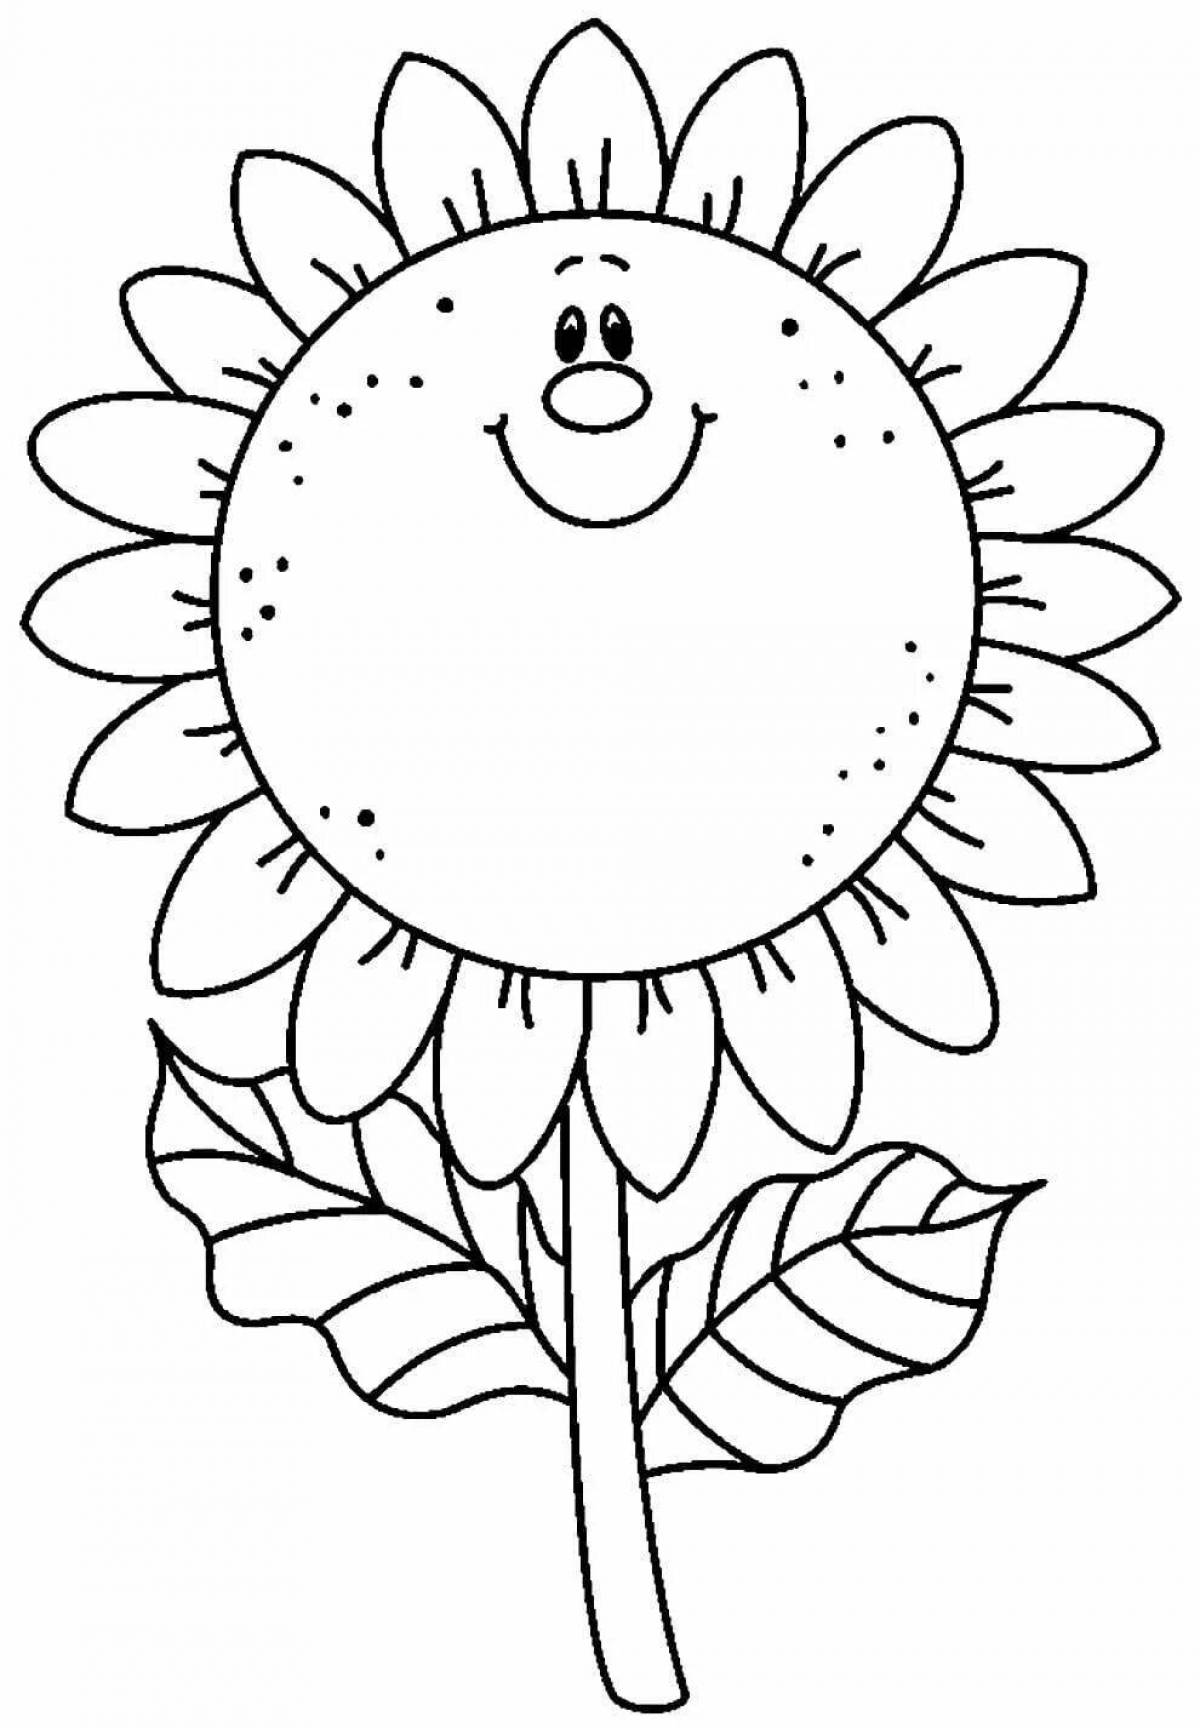 Beautiful coloring book sunflowers for kids 2-3 years old